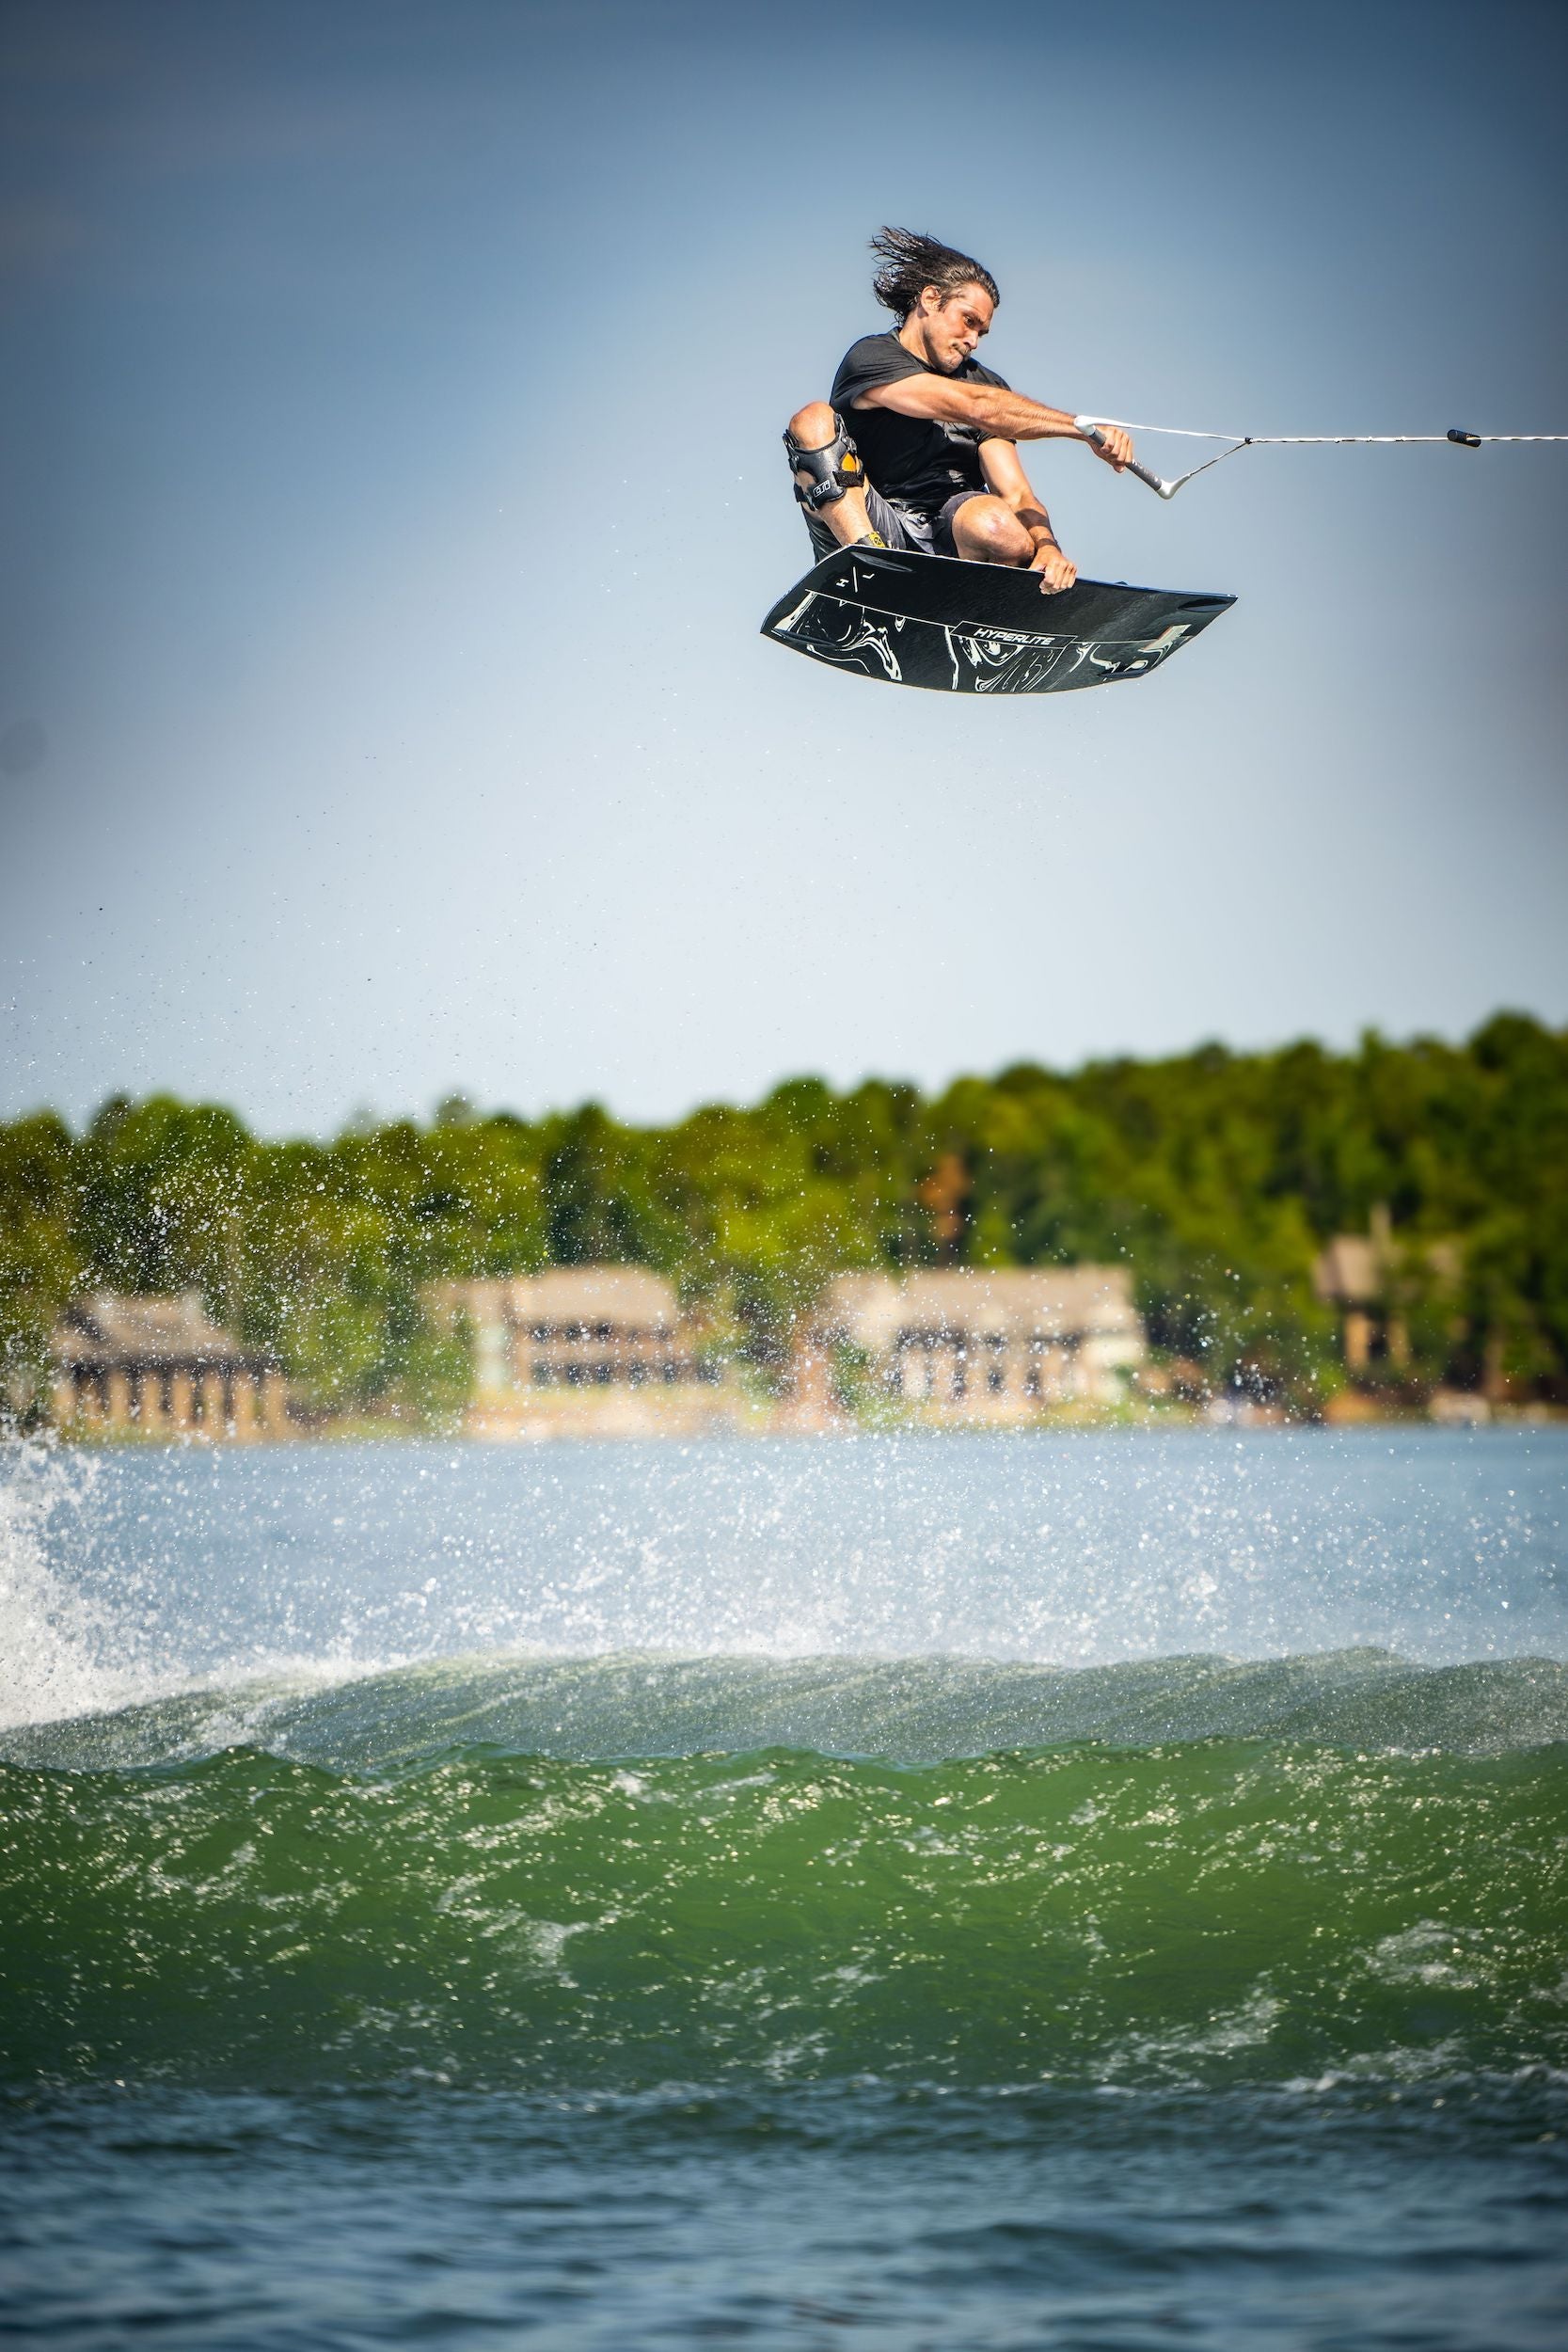 Josh Twelker wakeboarding in the air over a lake on the Hyperlite 2023 Cryptic Wakeboard.